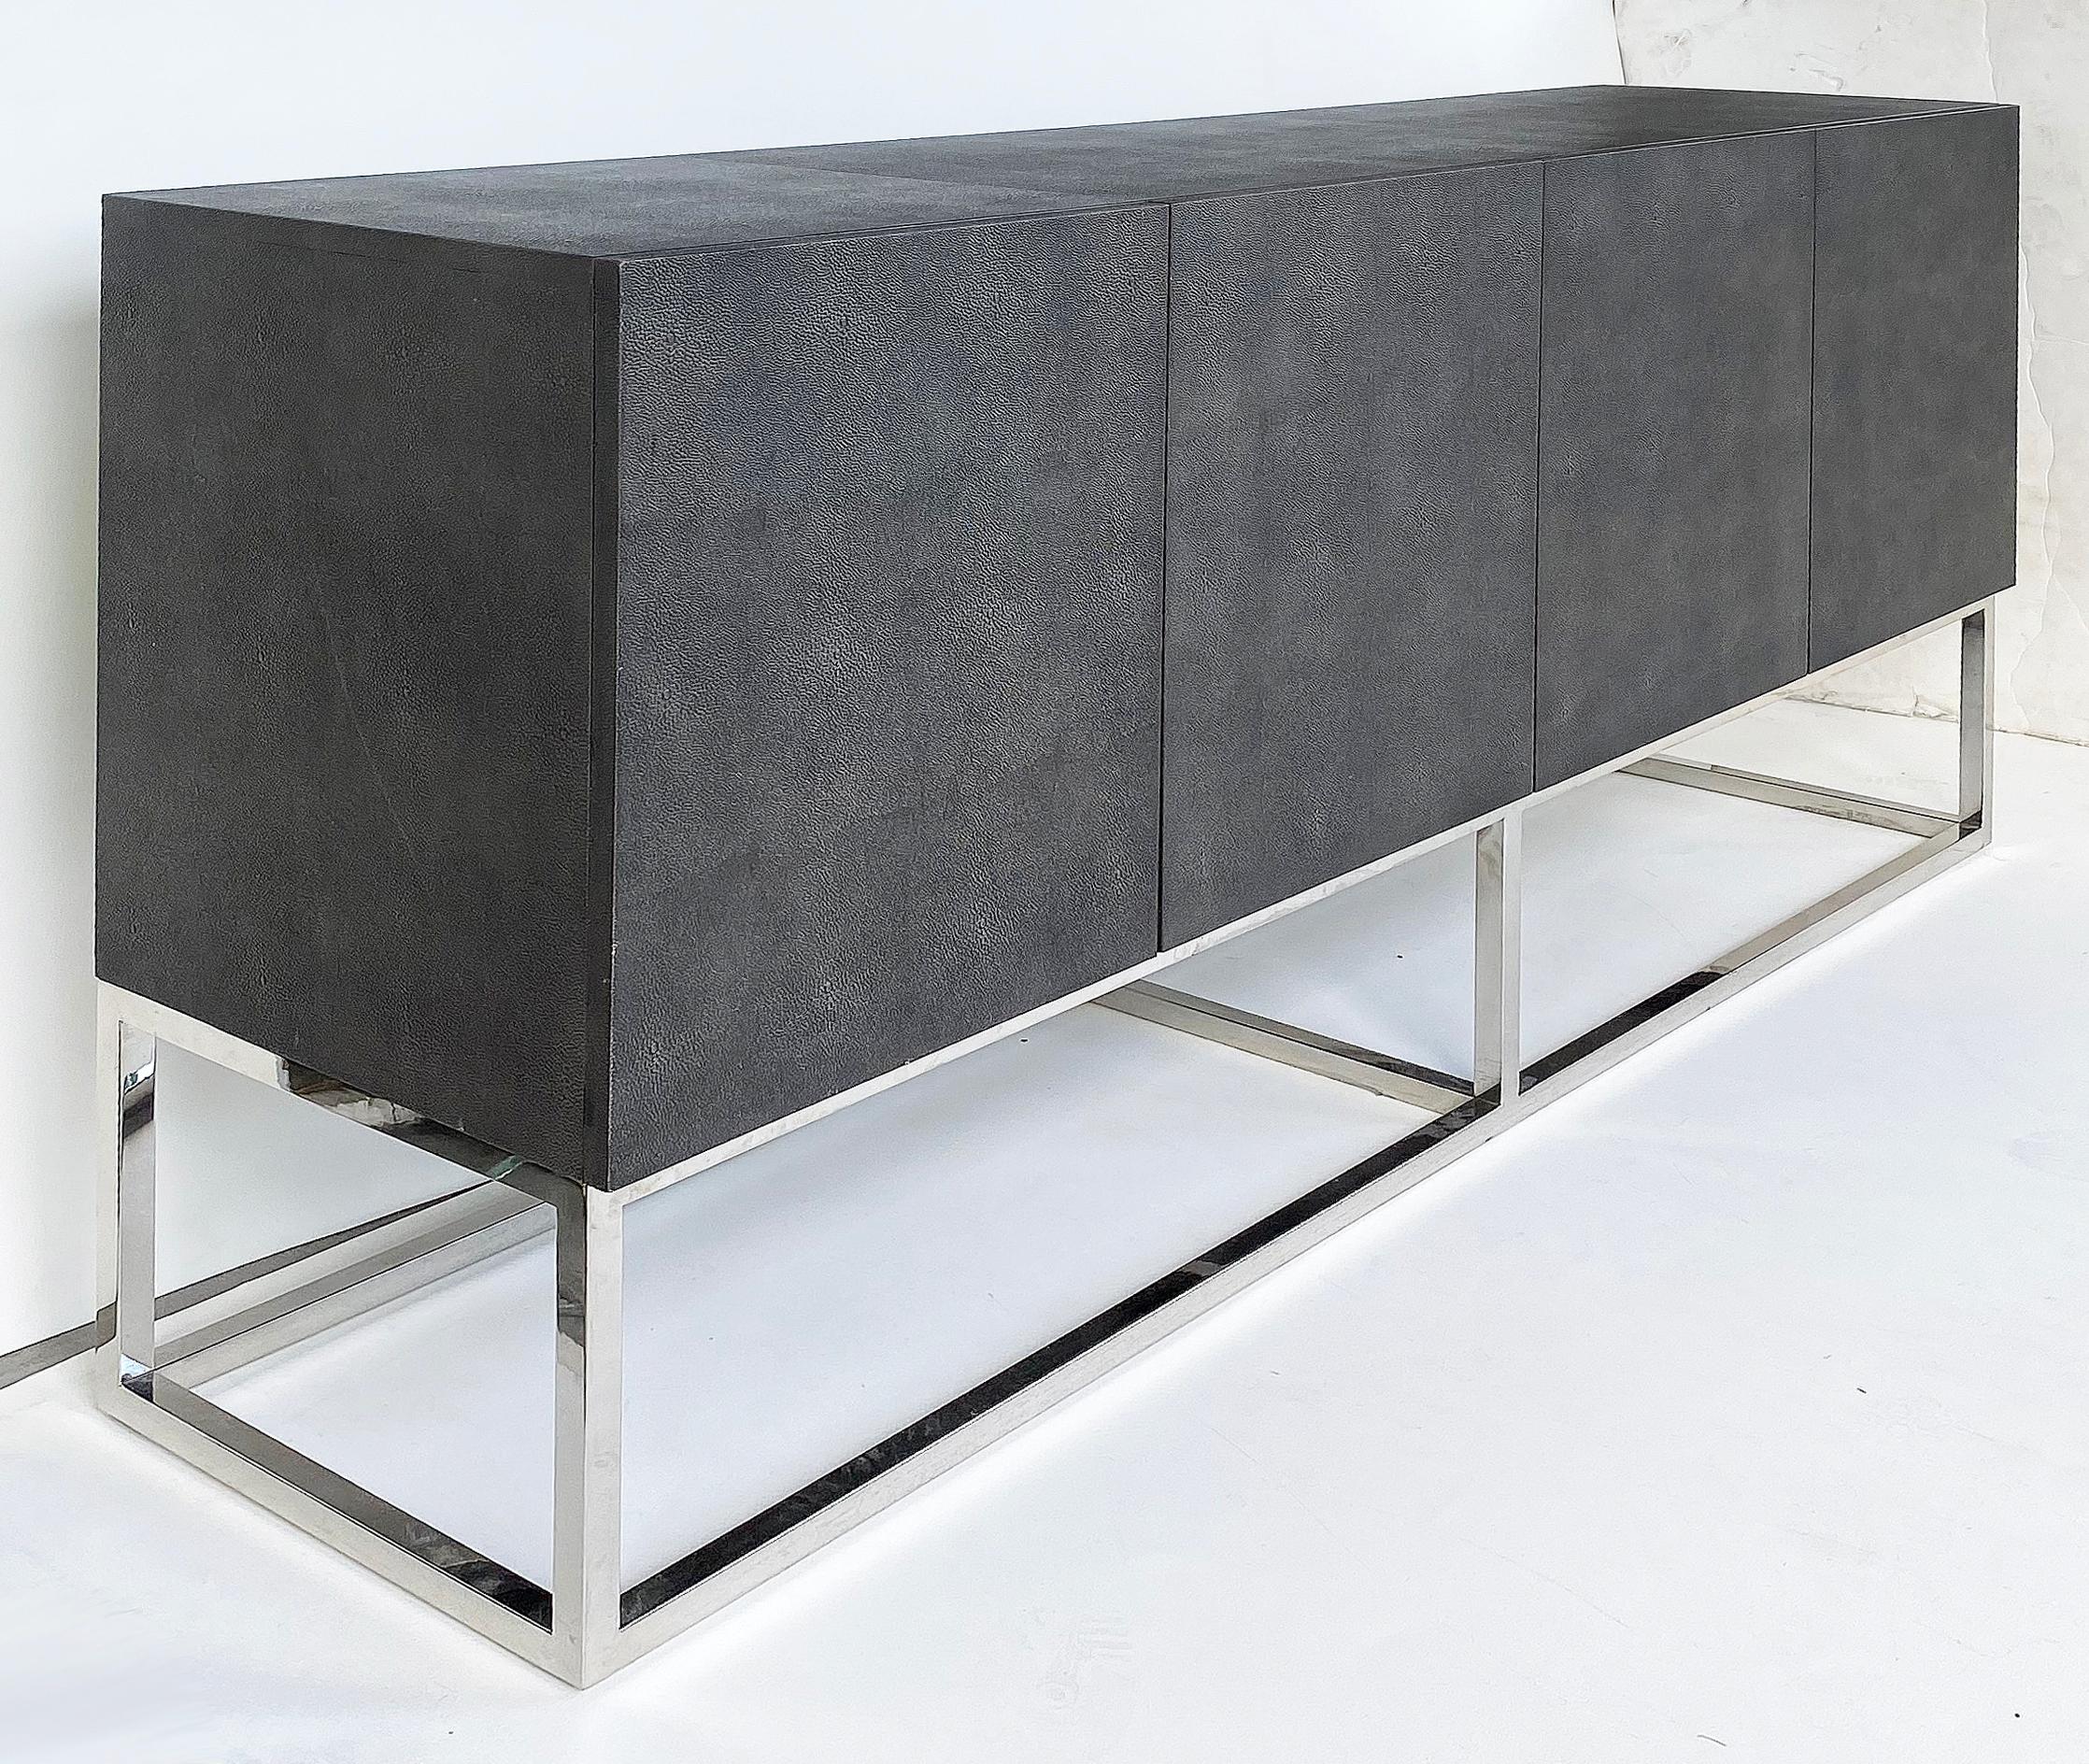 Bernhardt Faux Shagreen entertainment credenza on chrome base

Offered for sale is a Bernhardt Furniture Company faux shagreen 